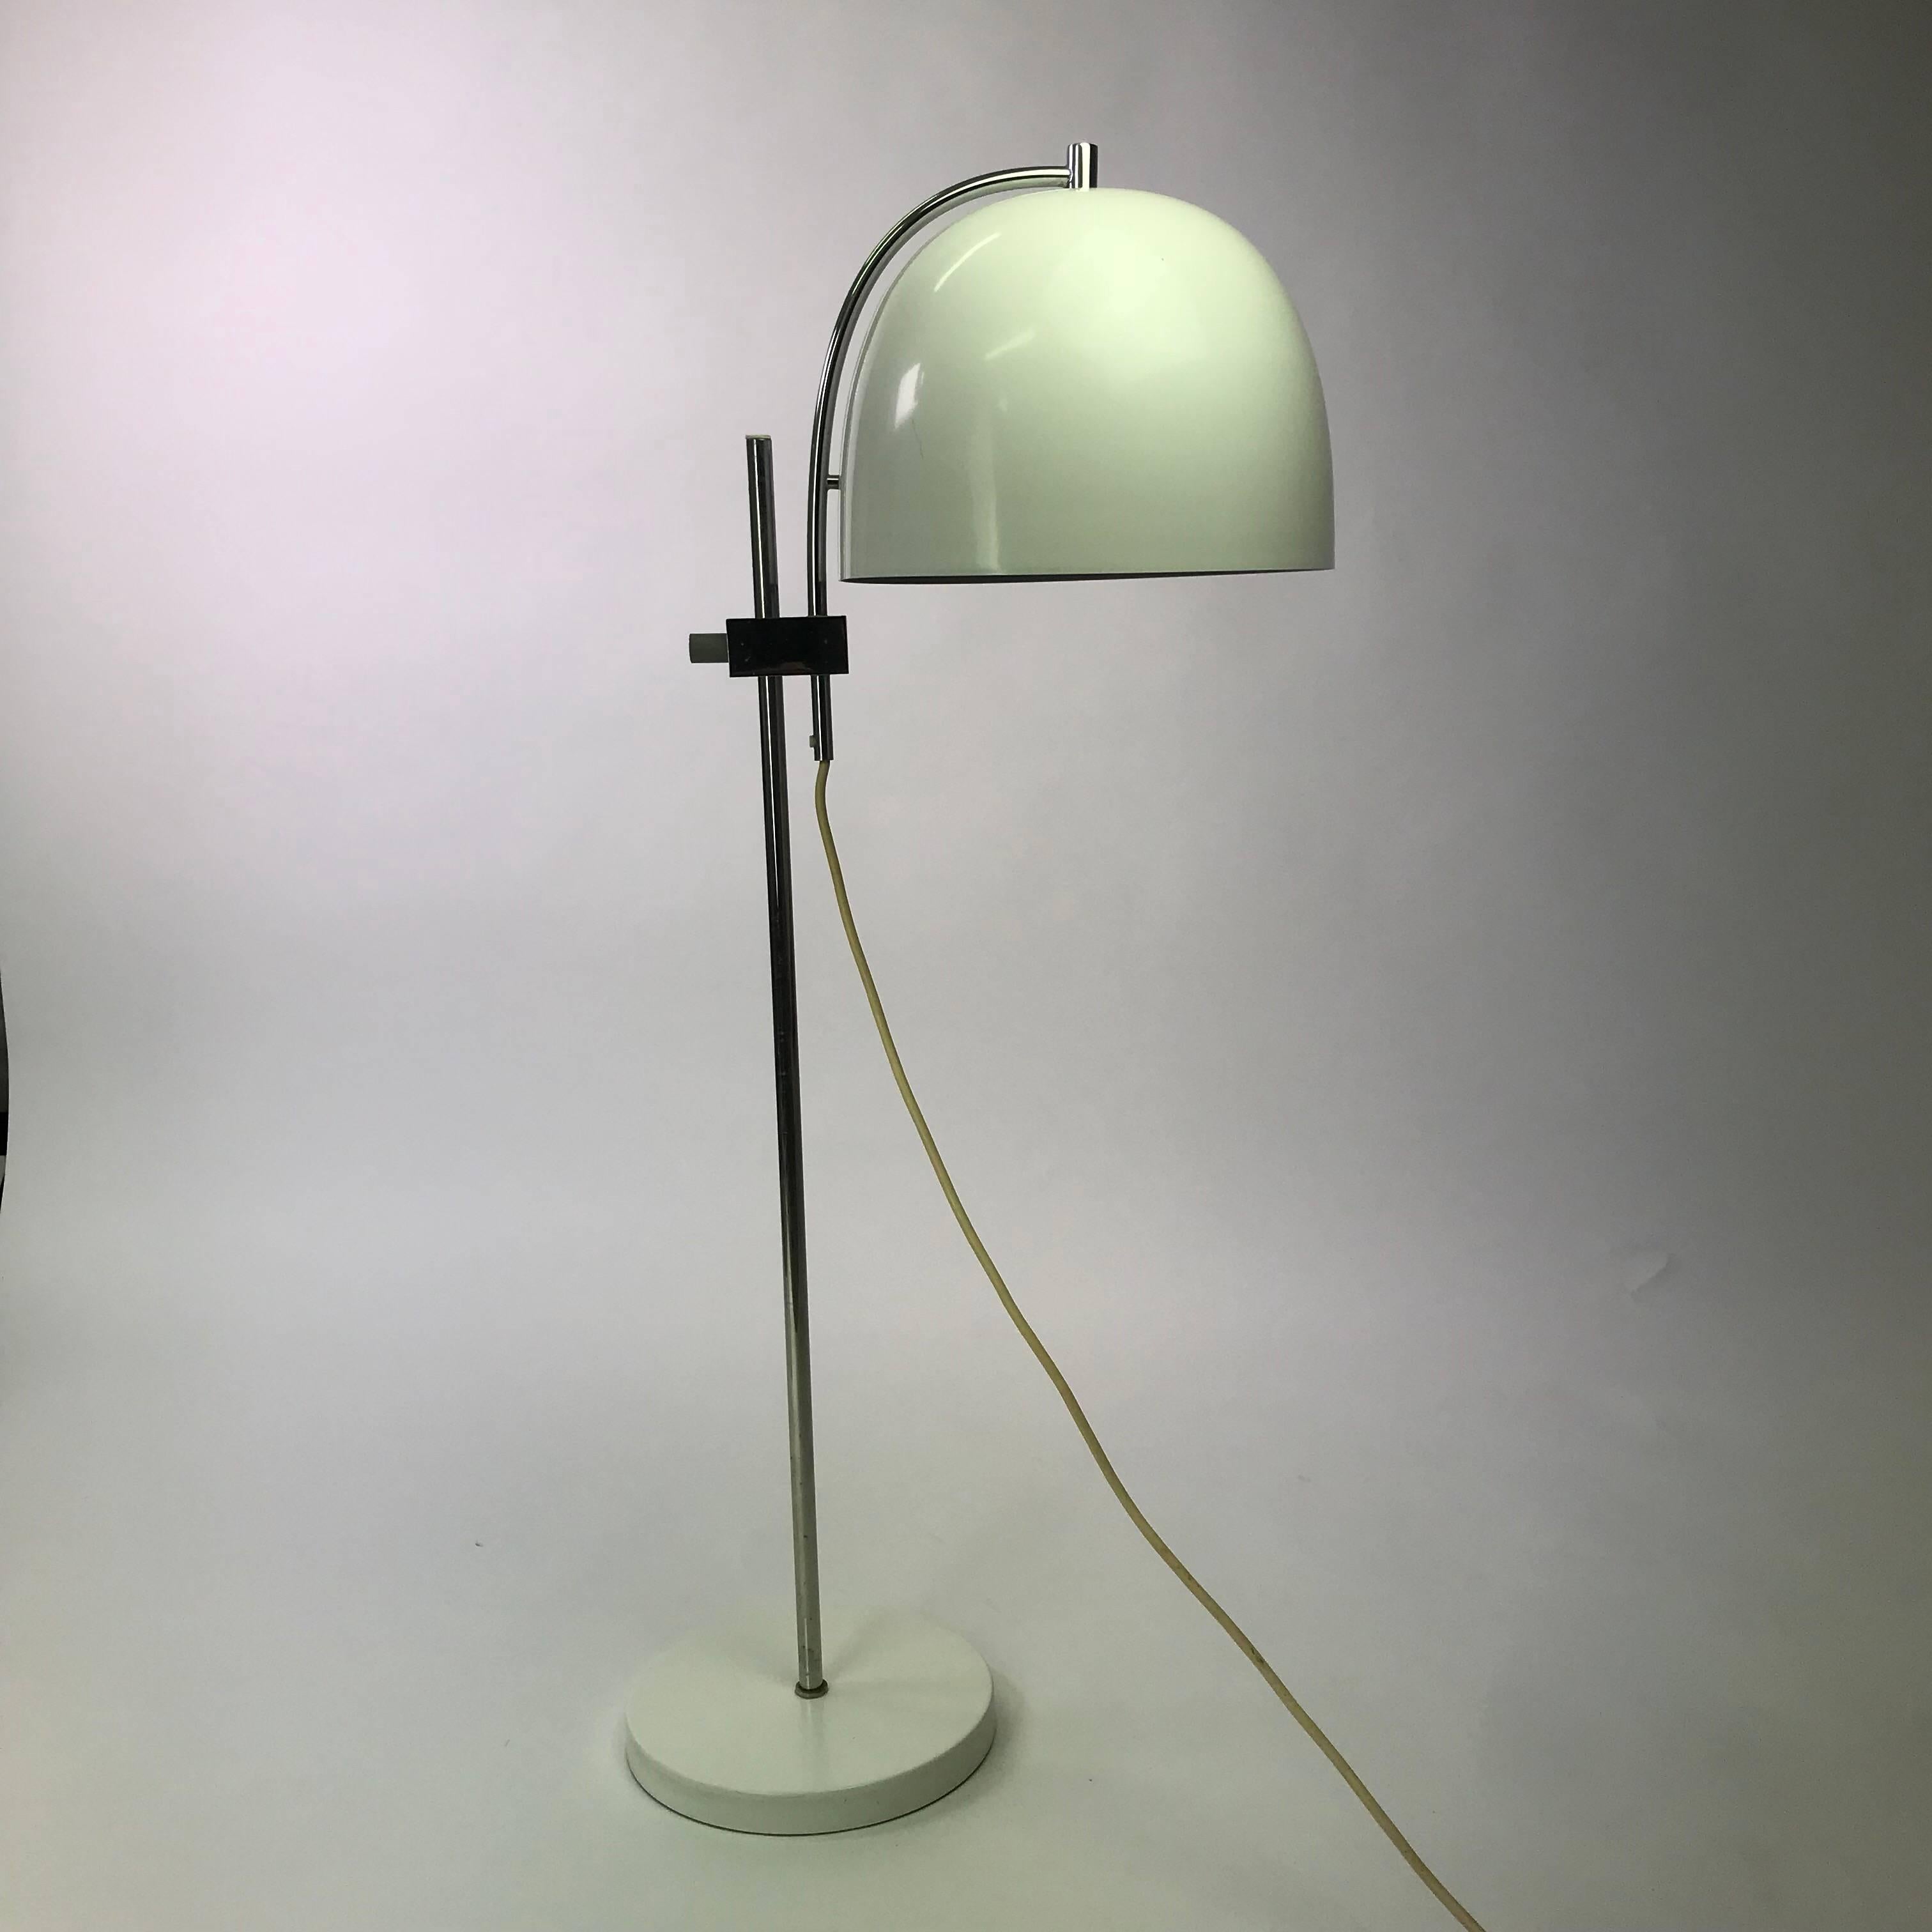 The rare Piet Hein 215 super elipse table lamp produced by Lyfa of Denmark and designed by Piet Hein.

Piet Hein was intriged by geometrical shapes and designed the renowned Super Elipse.

The shape is mostly known as the Super Elipse table by